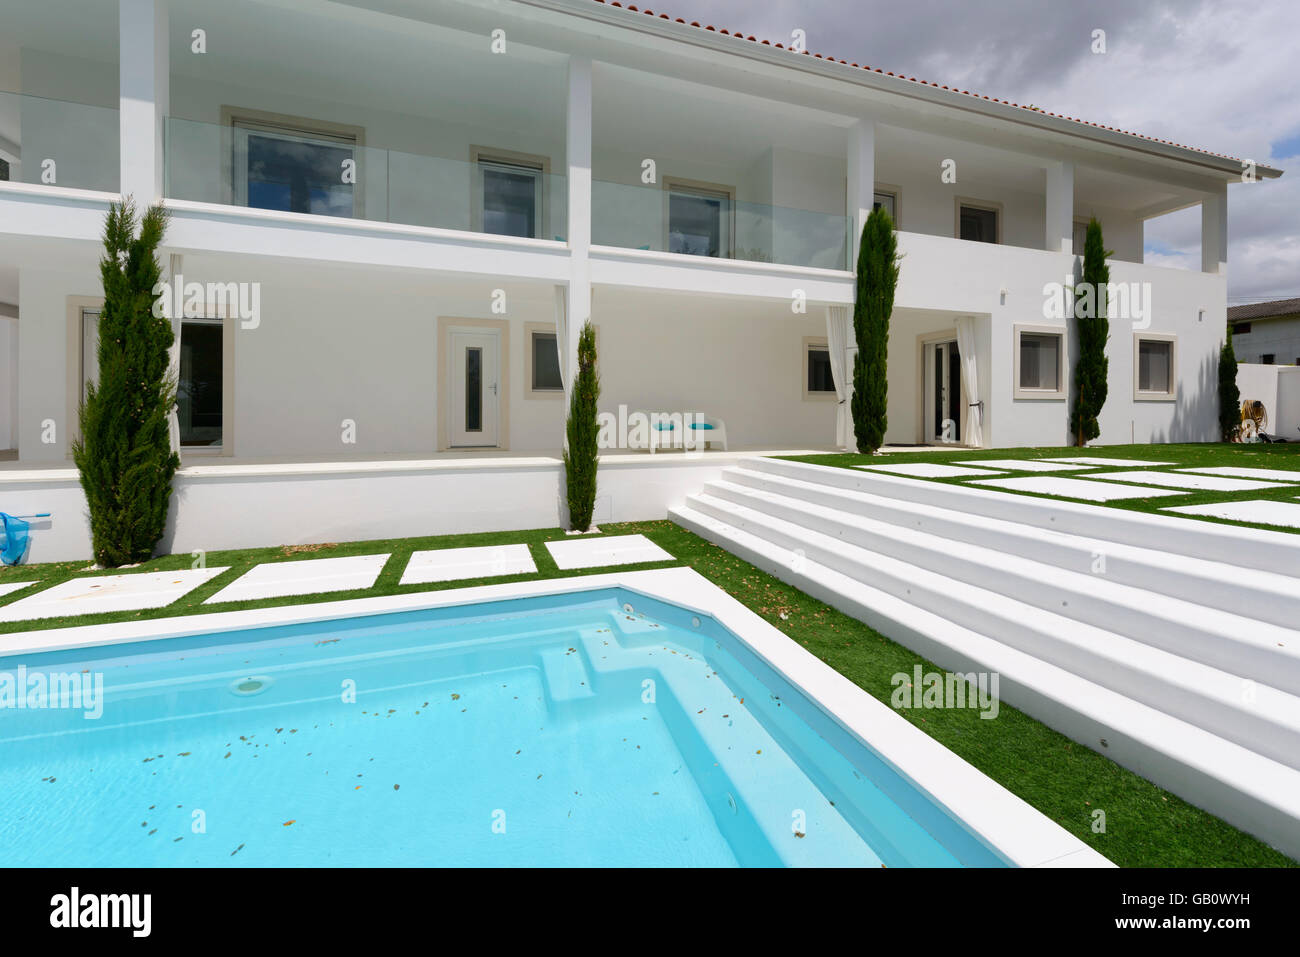 House with outdoor swimming pool Stock Photo